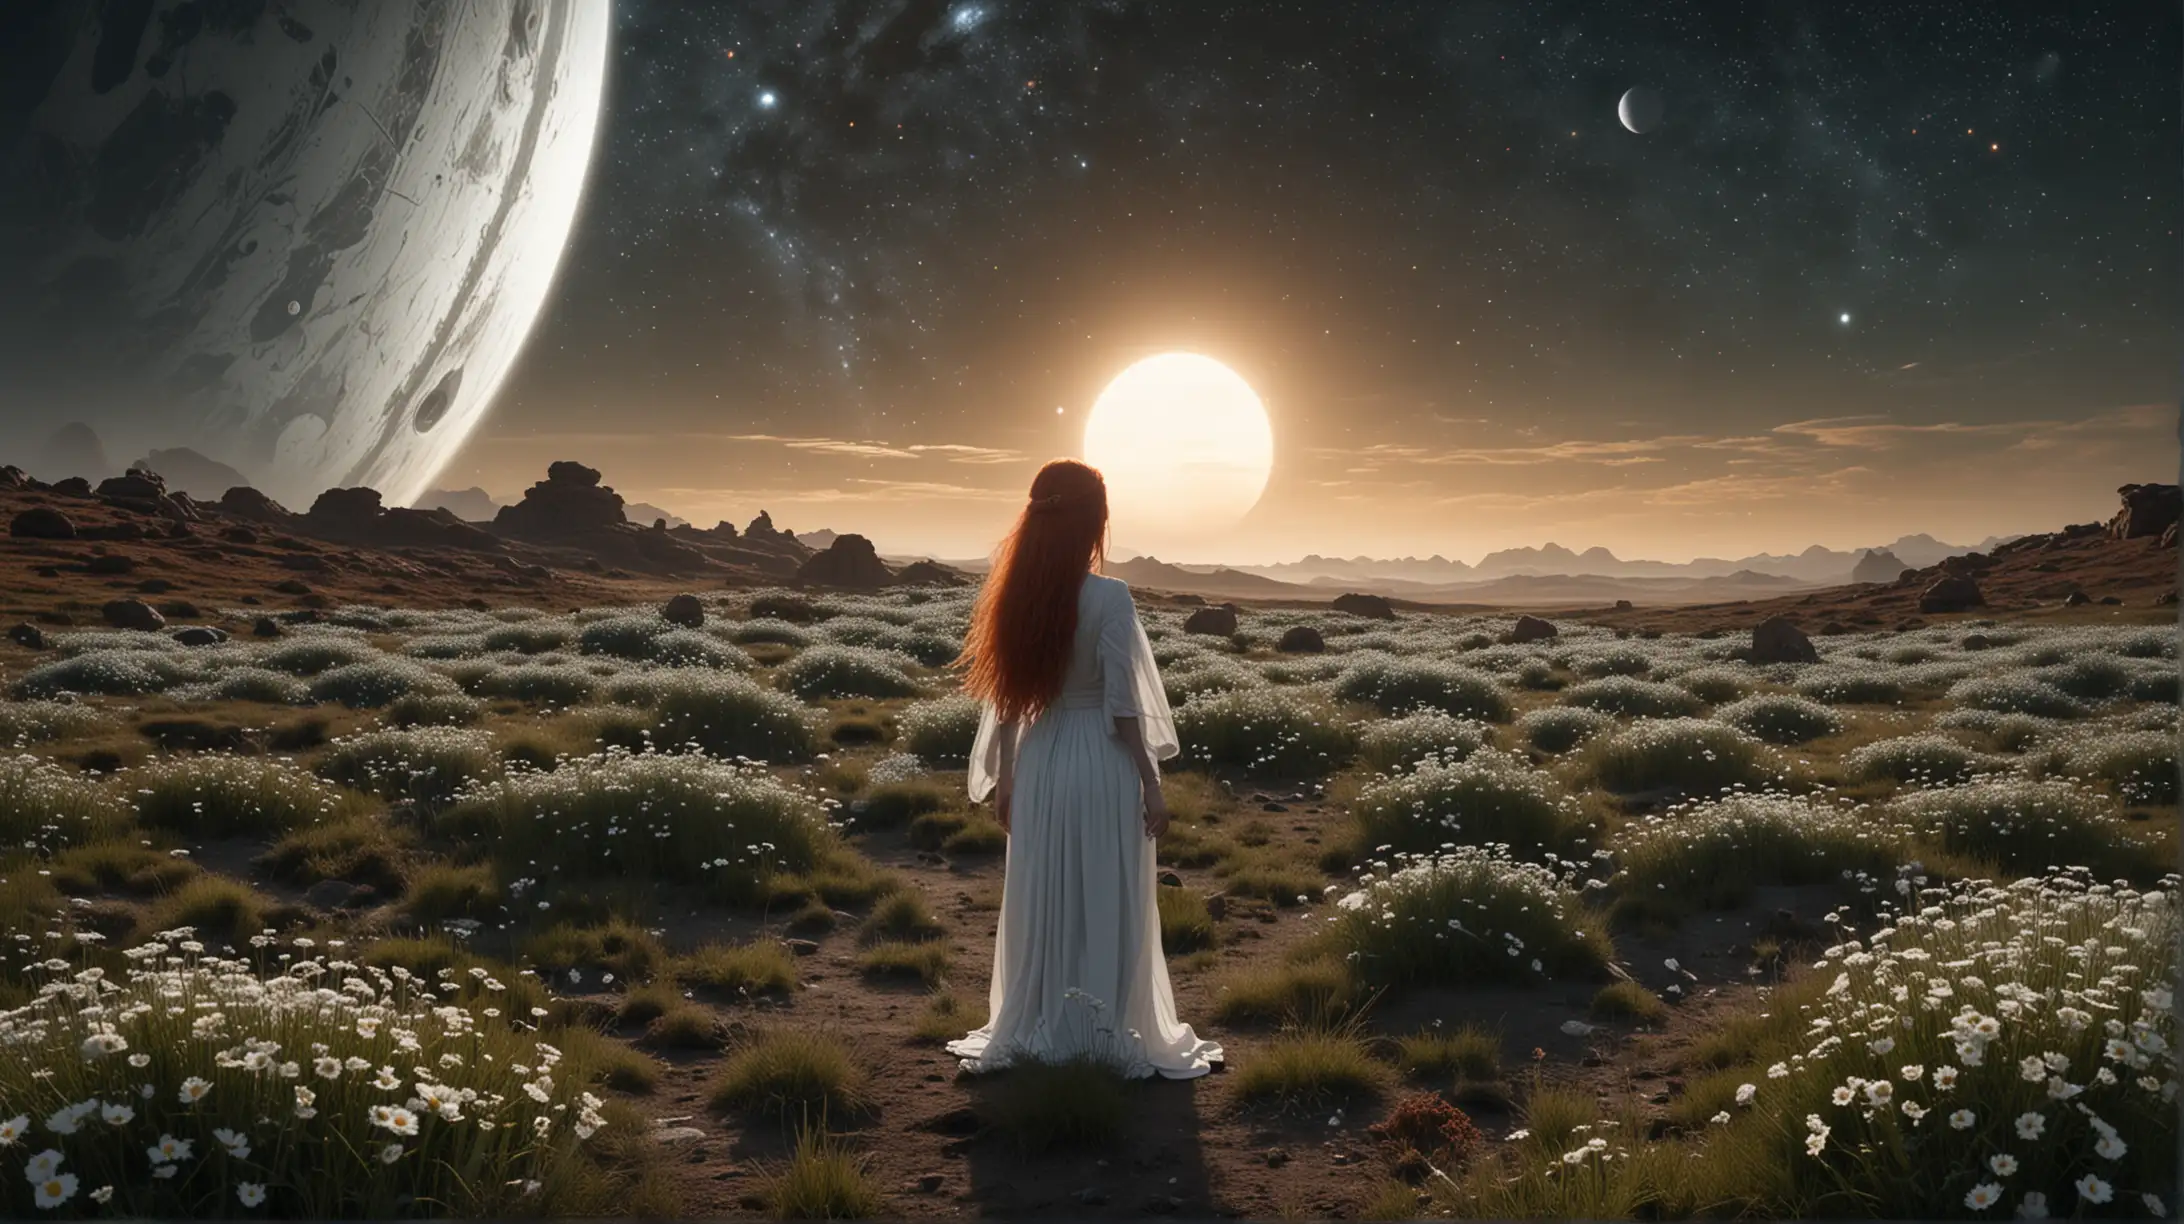 A serene night scene set on an alien planet. In the foreground, a woman with long red hair, wearing a flowing white dress, stands in a vast field of softly glowing plants. Beside her, a small white animal, resembling a fox, accompanies her. The sky is filled with a dense blanket of stars, and several celestial bodies are visible: a large planet with visible rings on the left, a glowing white symbol resembling an eye in the center, and a dark, eclipsed planet on the right. The curvature of the large planet suggests a horizon, adding depth to the cosmic landscape. The overall atmosphere is peaceful and otherworldly, with a sense of exploration and wonder.